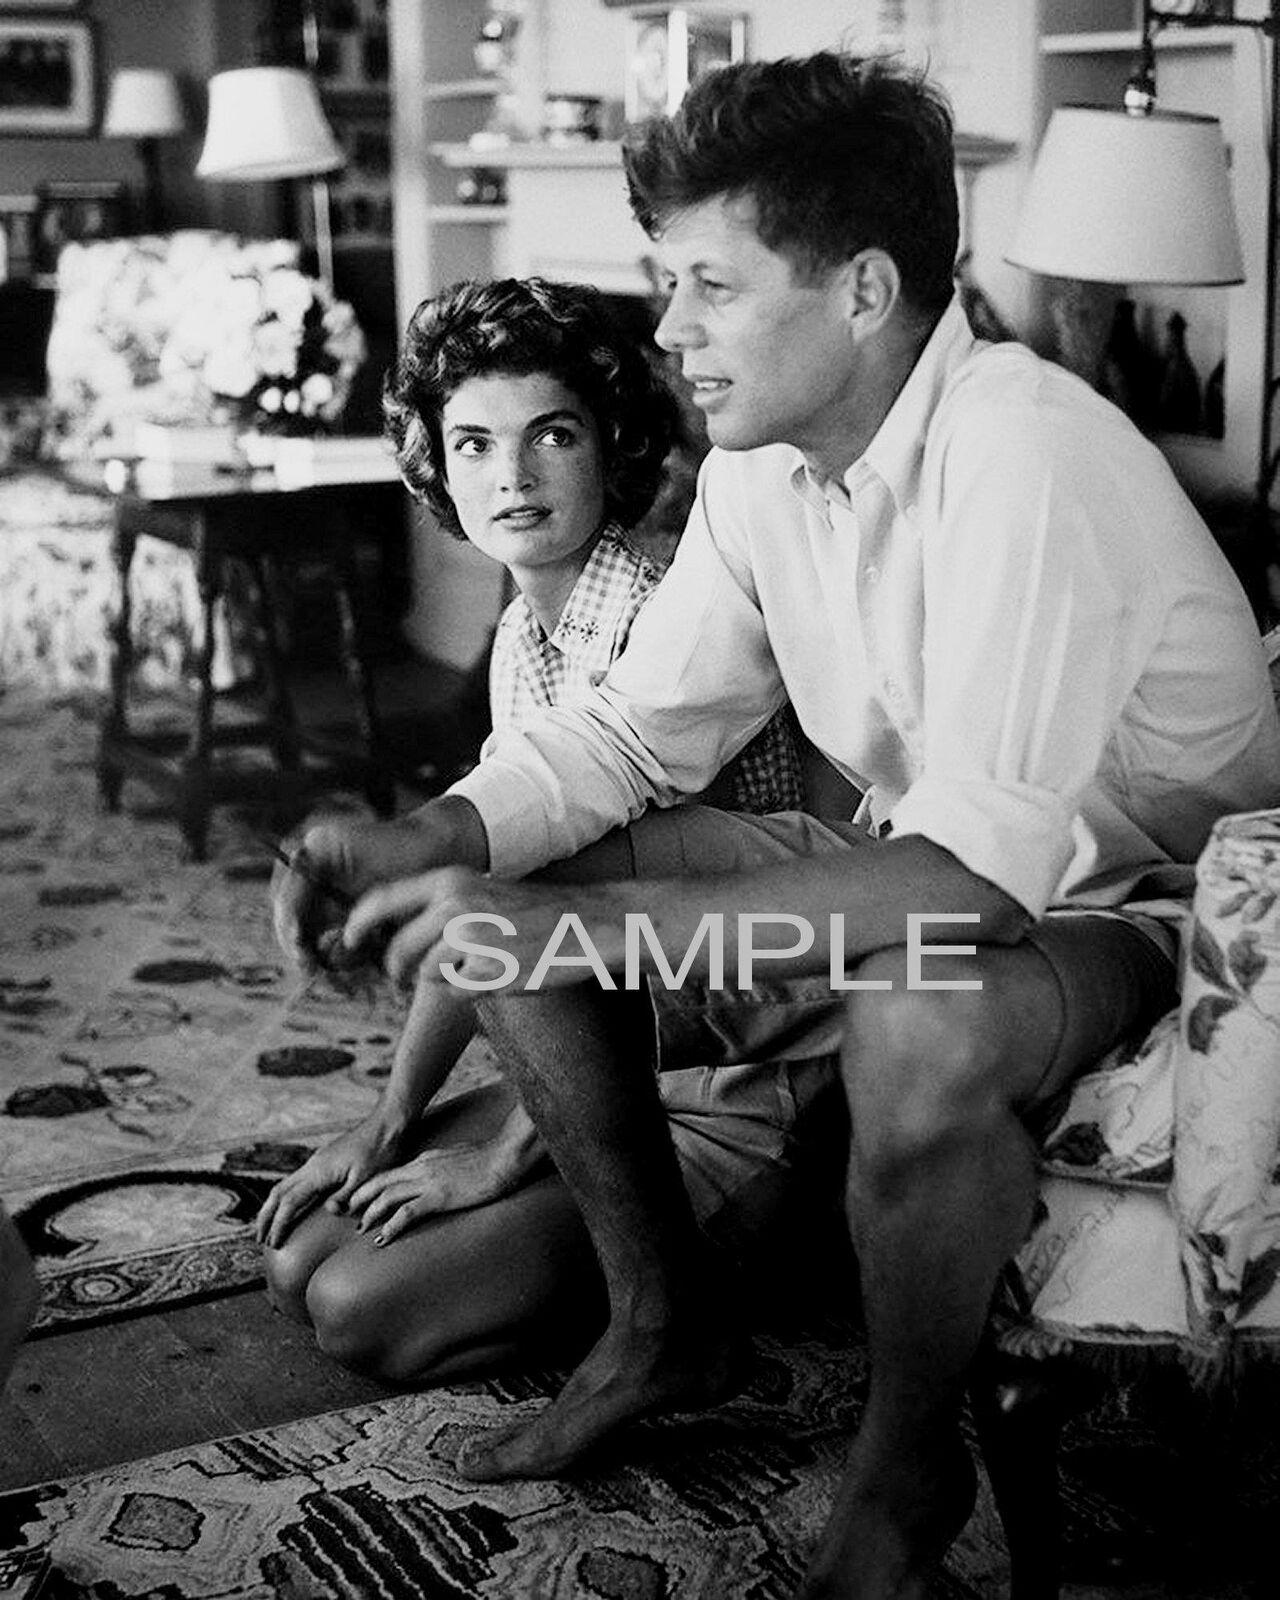 Early 1950s JACK KENNEDY & JACKIE BOUVIER CANDID PHOTO  (161-M)